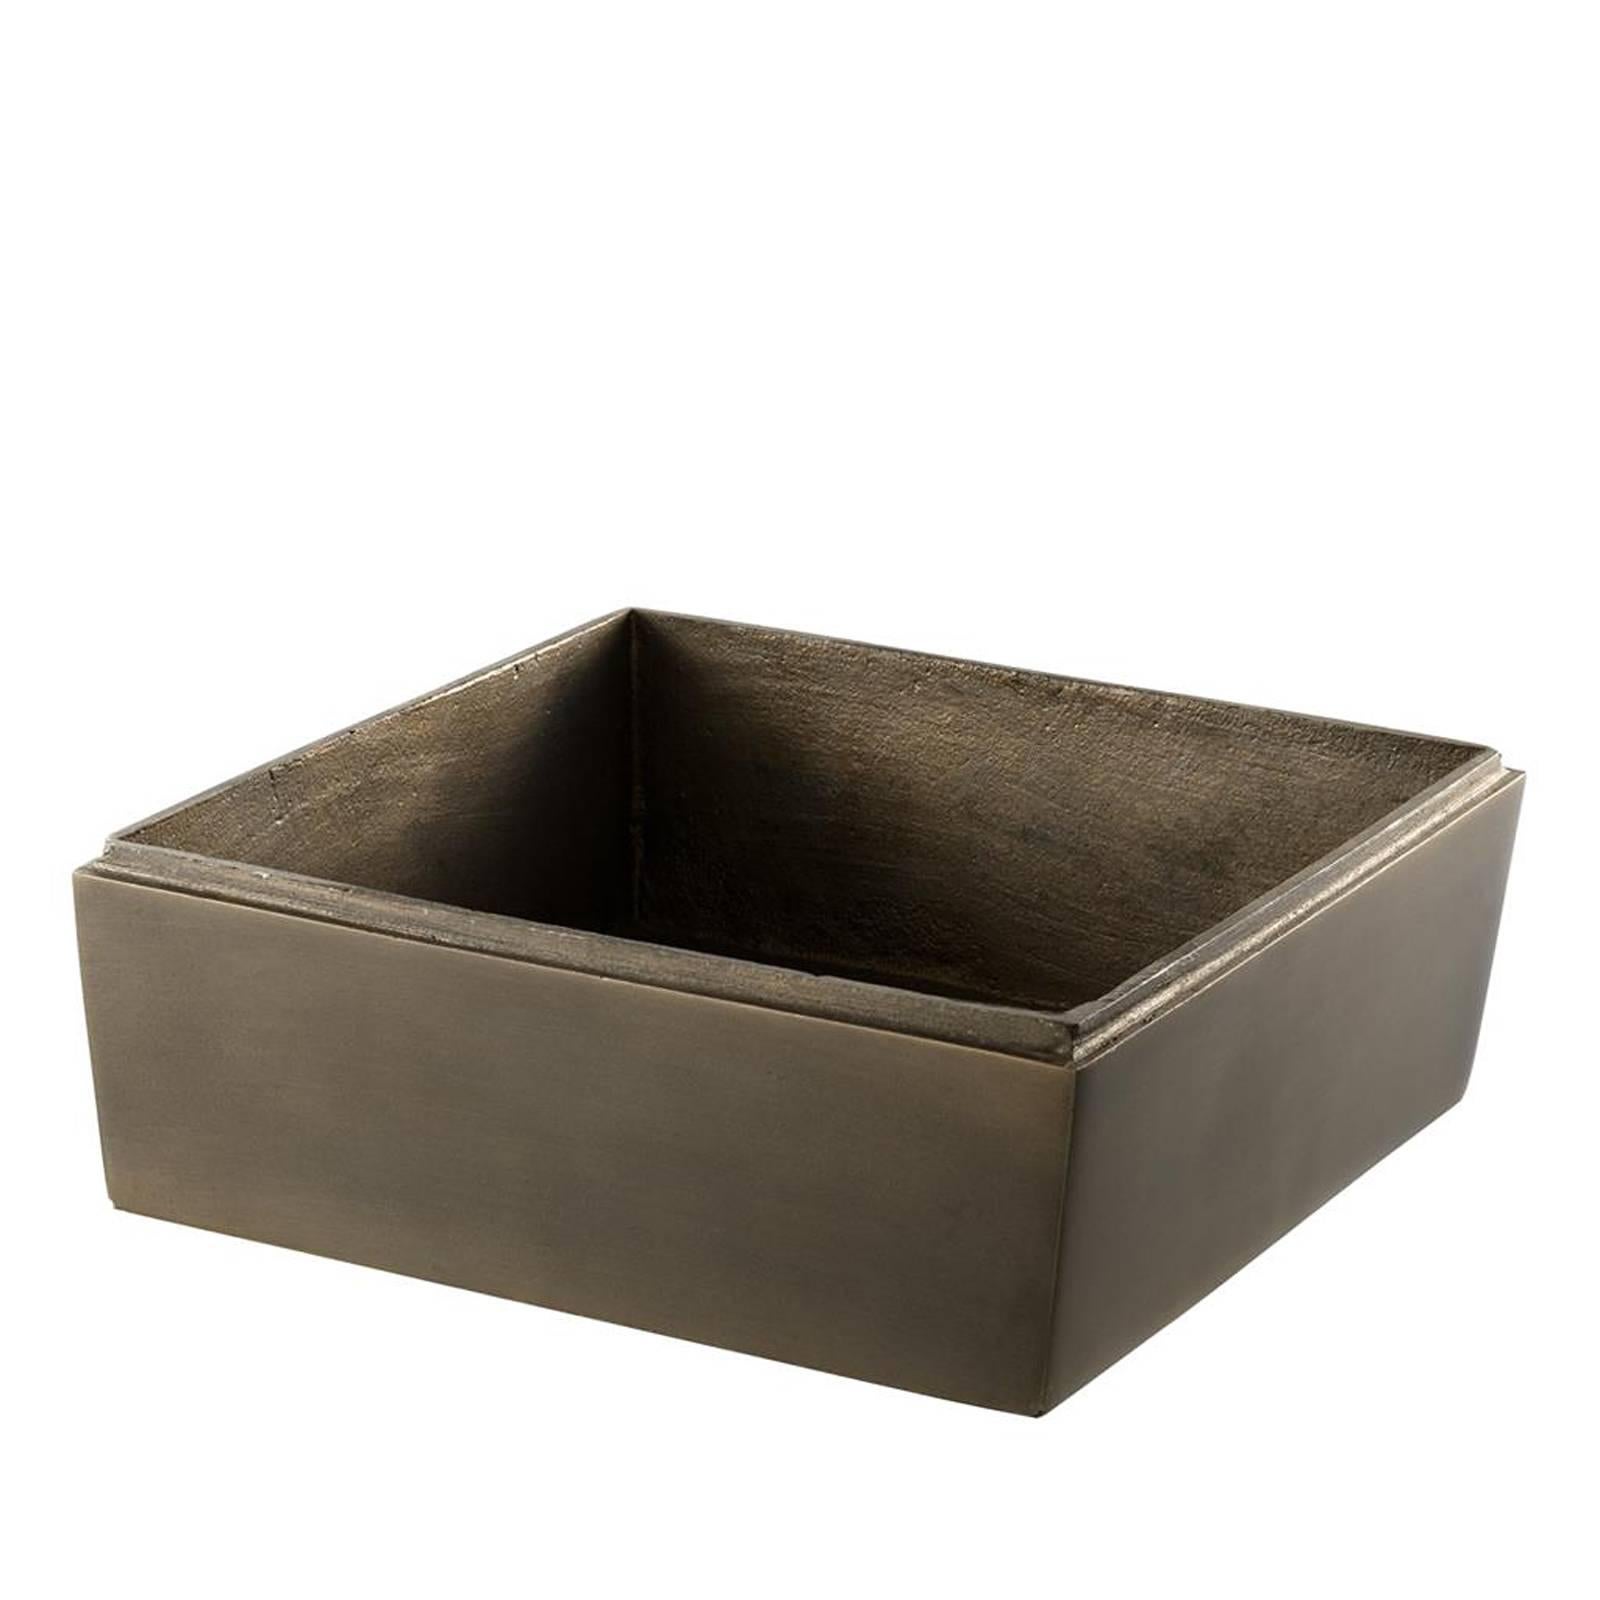 Classy ashtray in dark antique brass finish.
Also available in gunmetal bronze finish,
or in nickel finish on request.
  